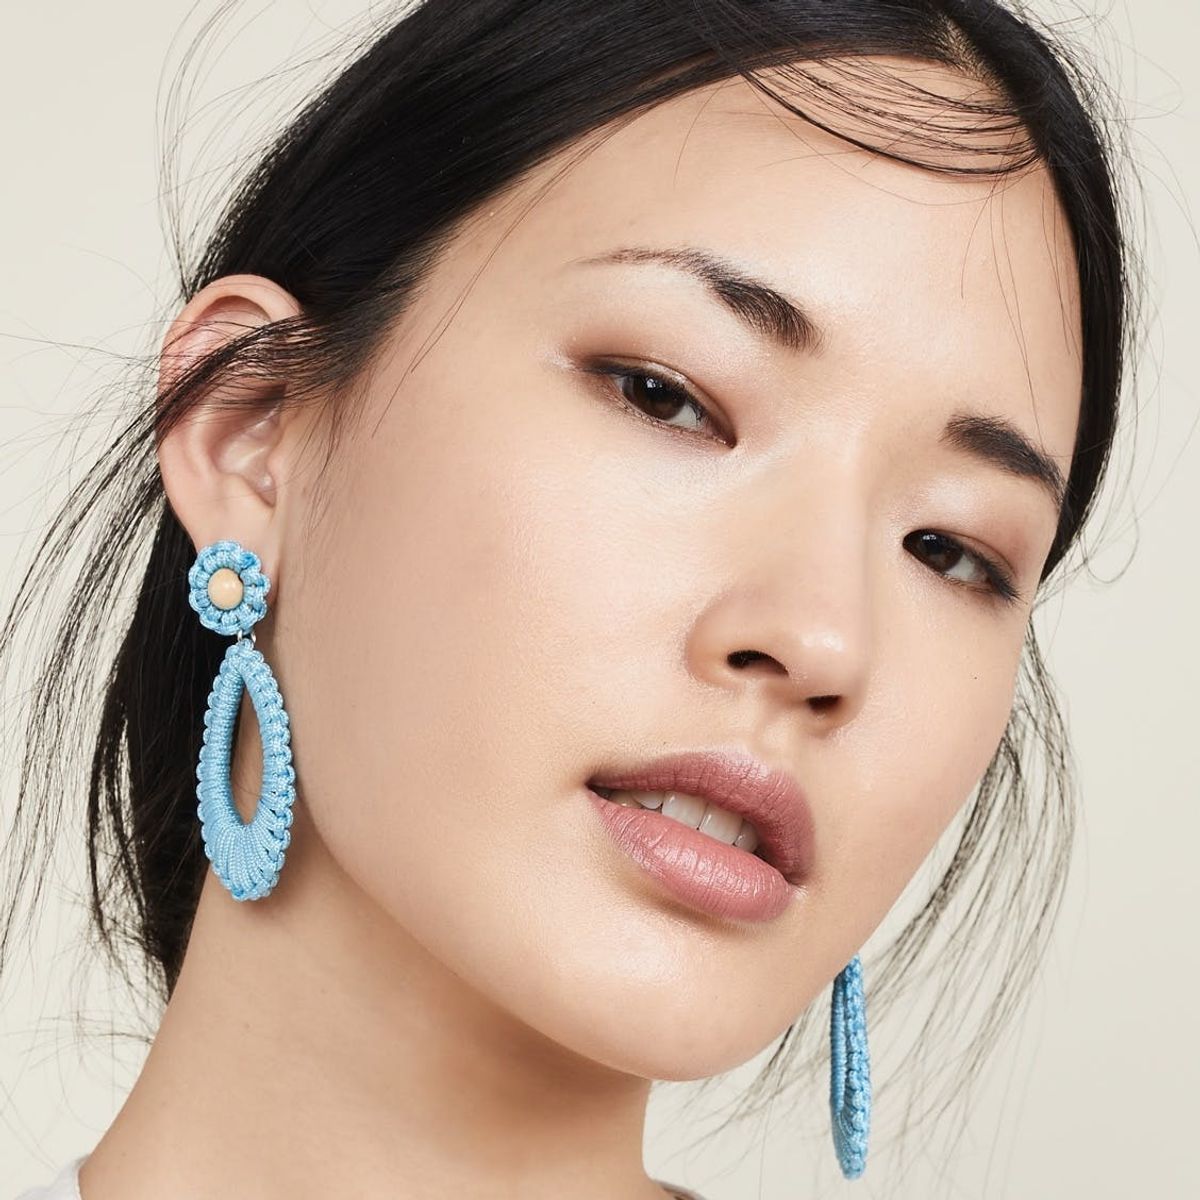 18 Trendy Earrings Made for 2019 Brides and Bridesmaids